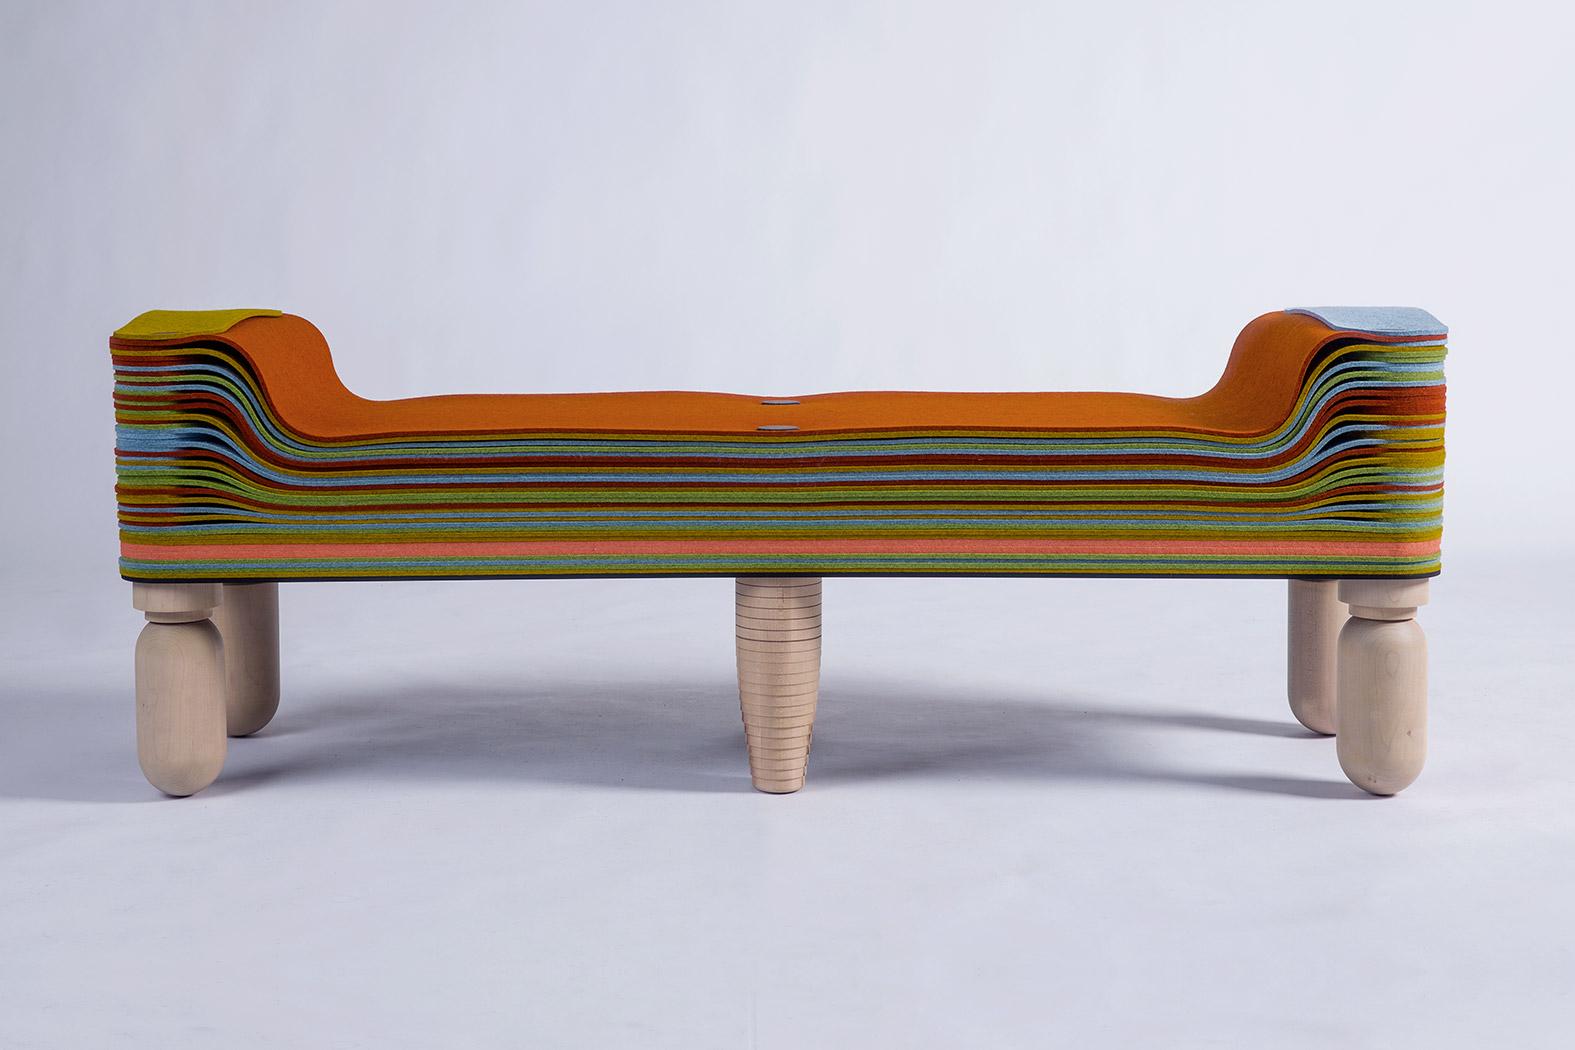 Maxine D, Felt and Wood Bench, Benoist F. Drut in STACKABL, Canada, 2021 For Sale 1